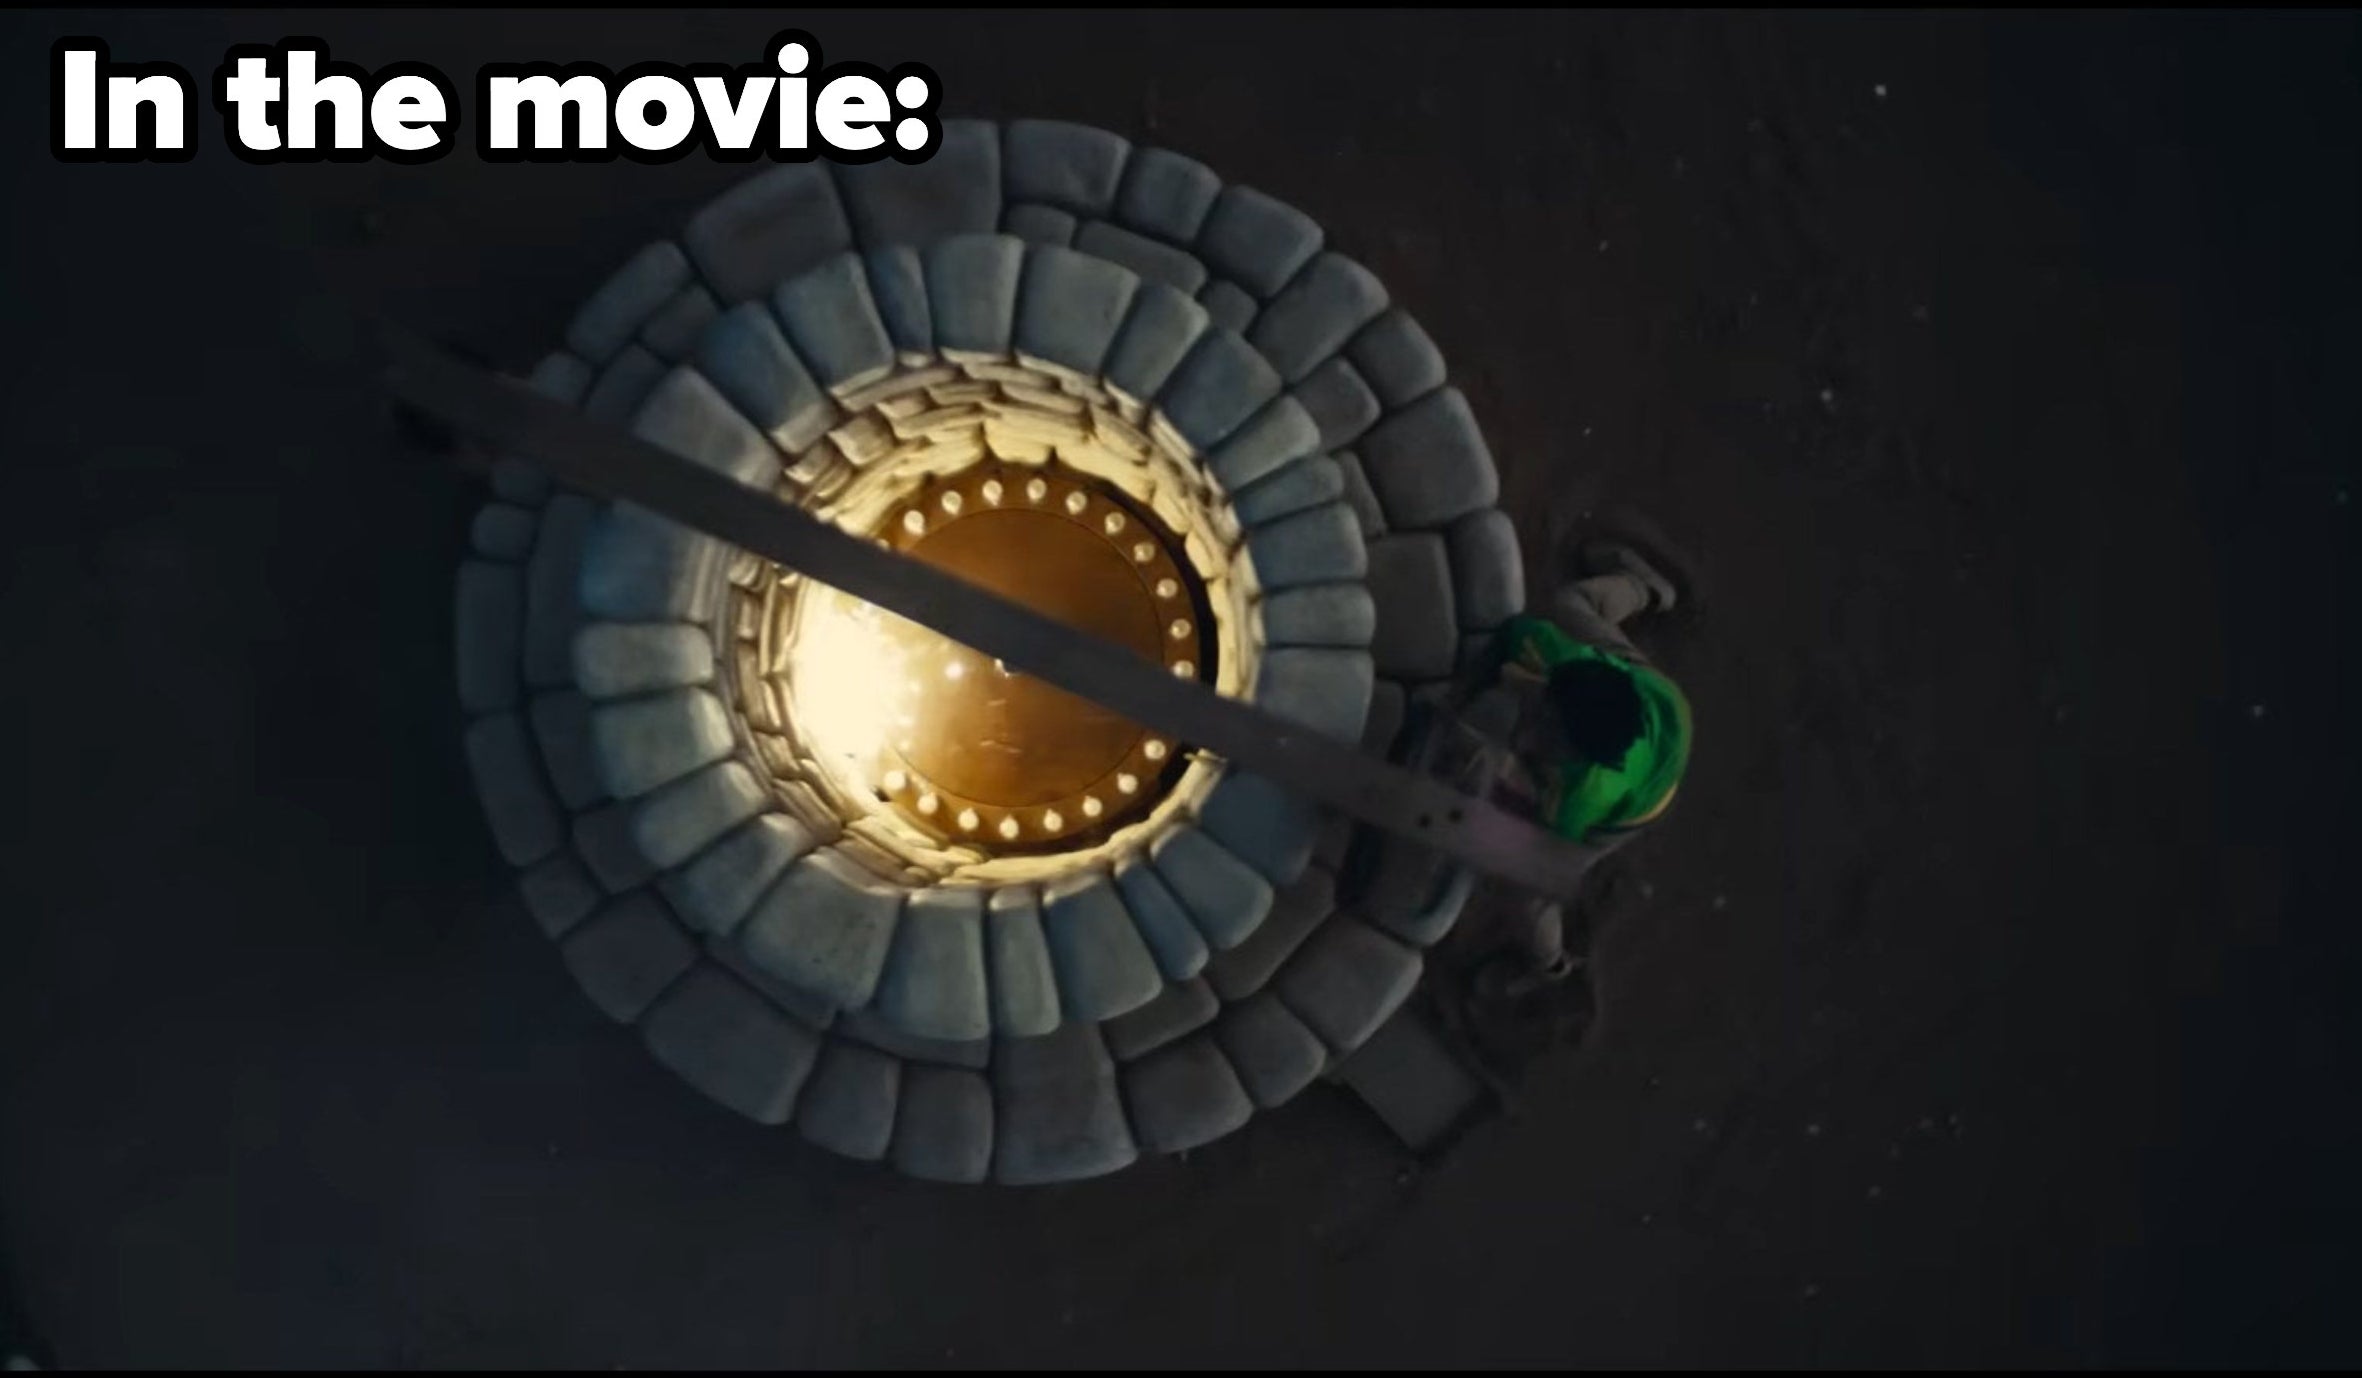 In the movie, a stone well holds a metal circle that emits a bright glow